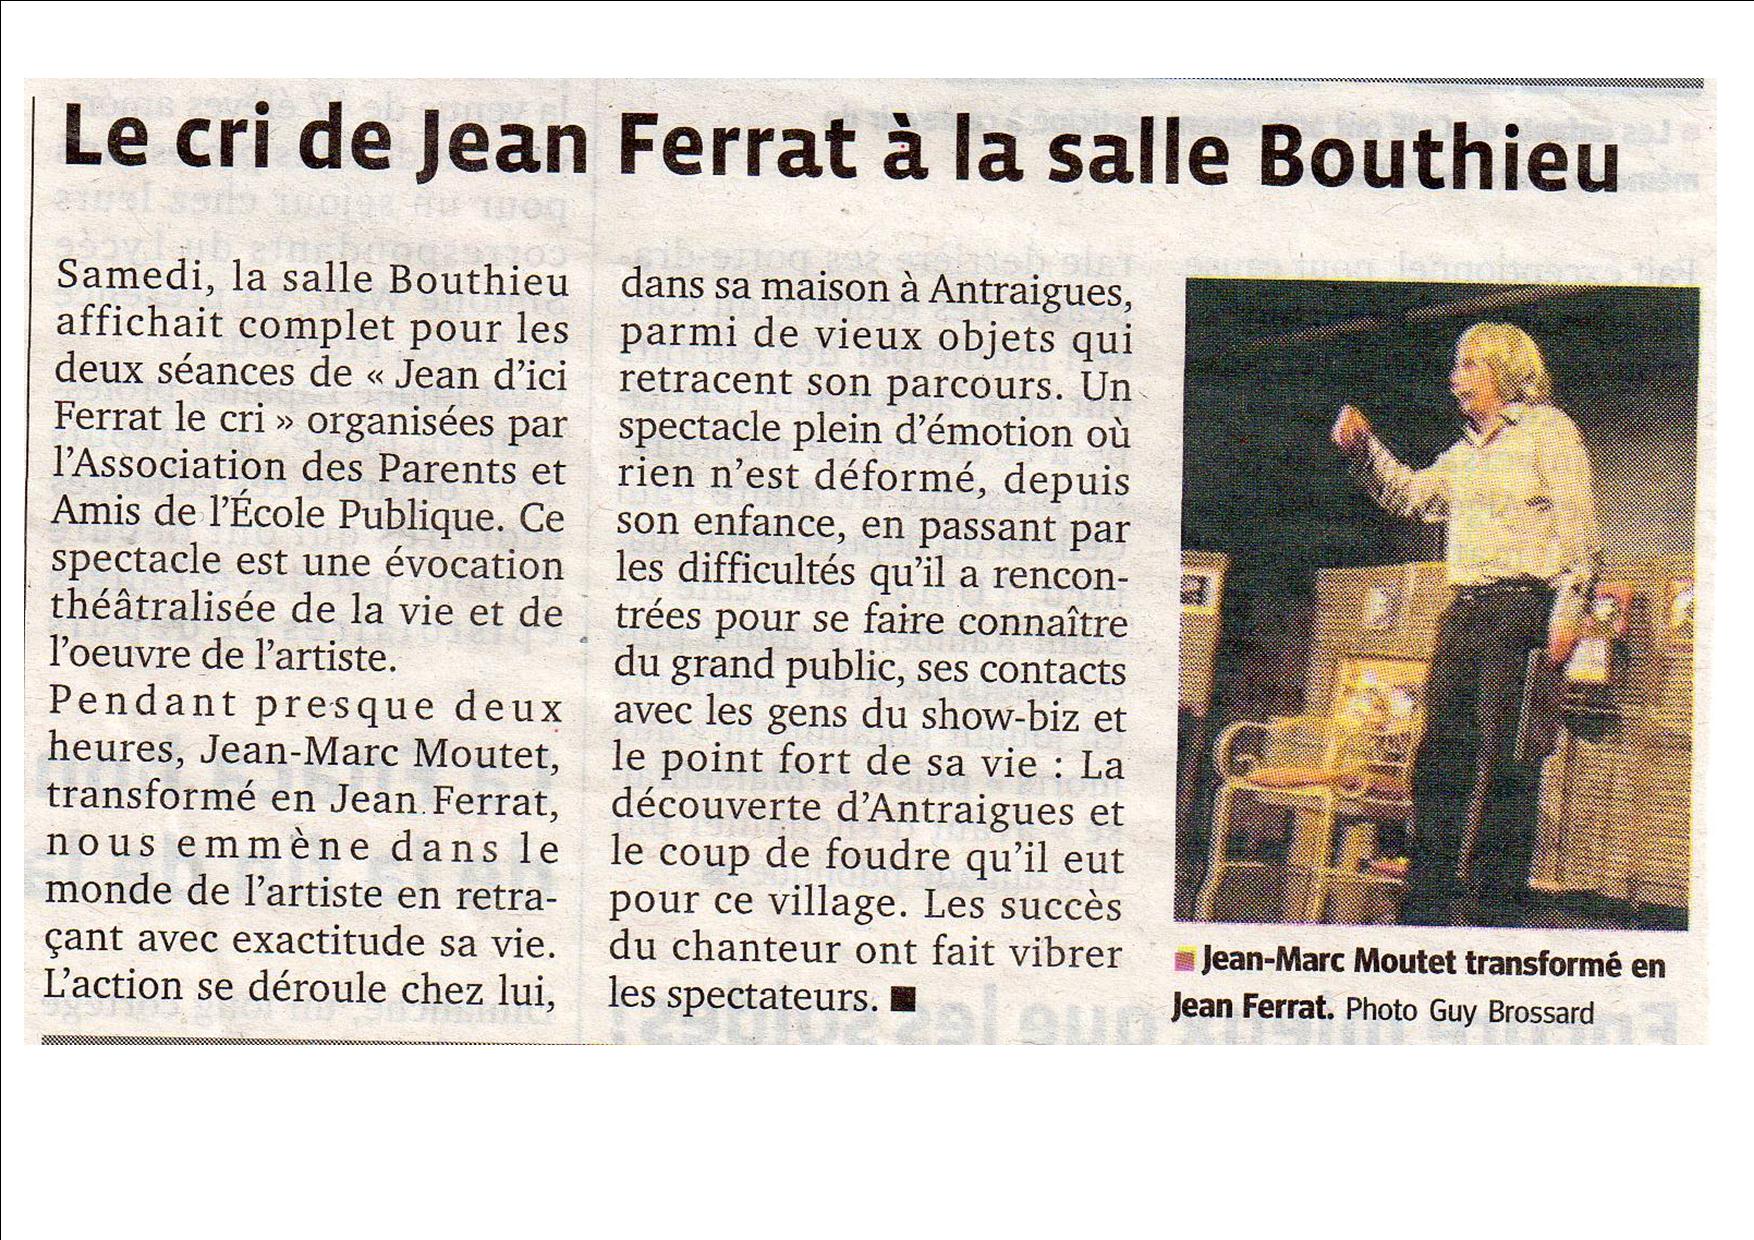 Article st heand